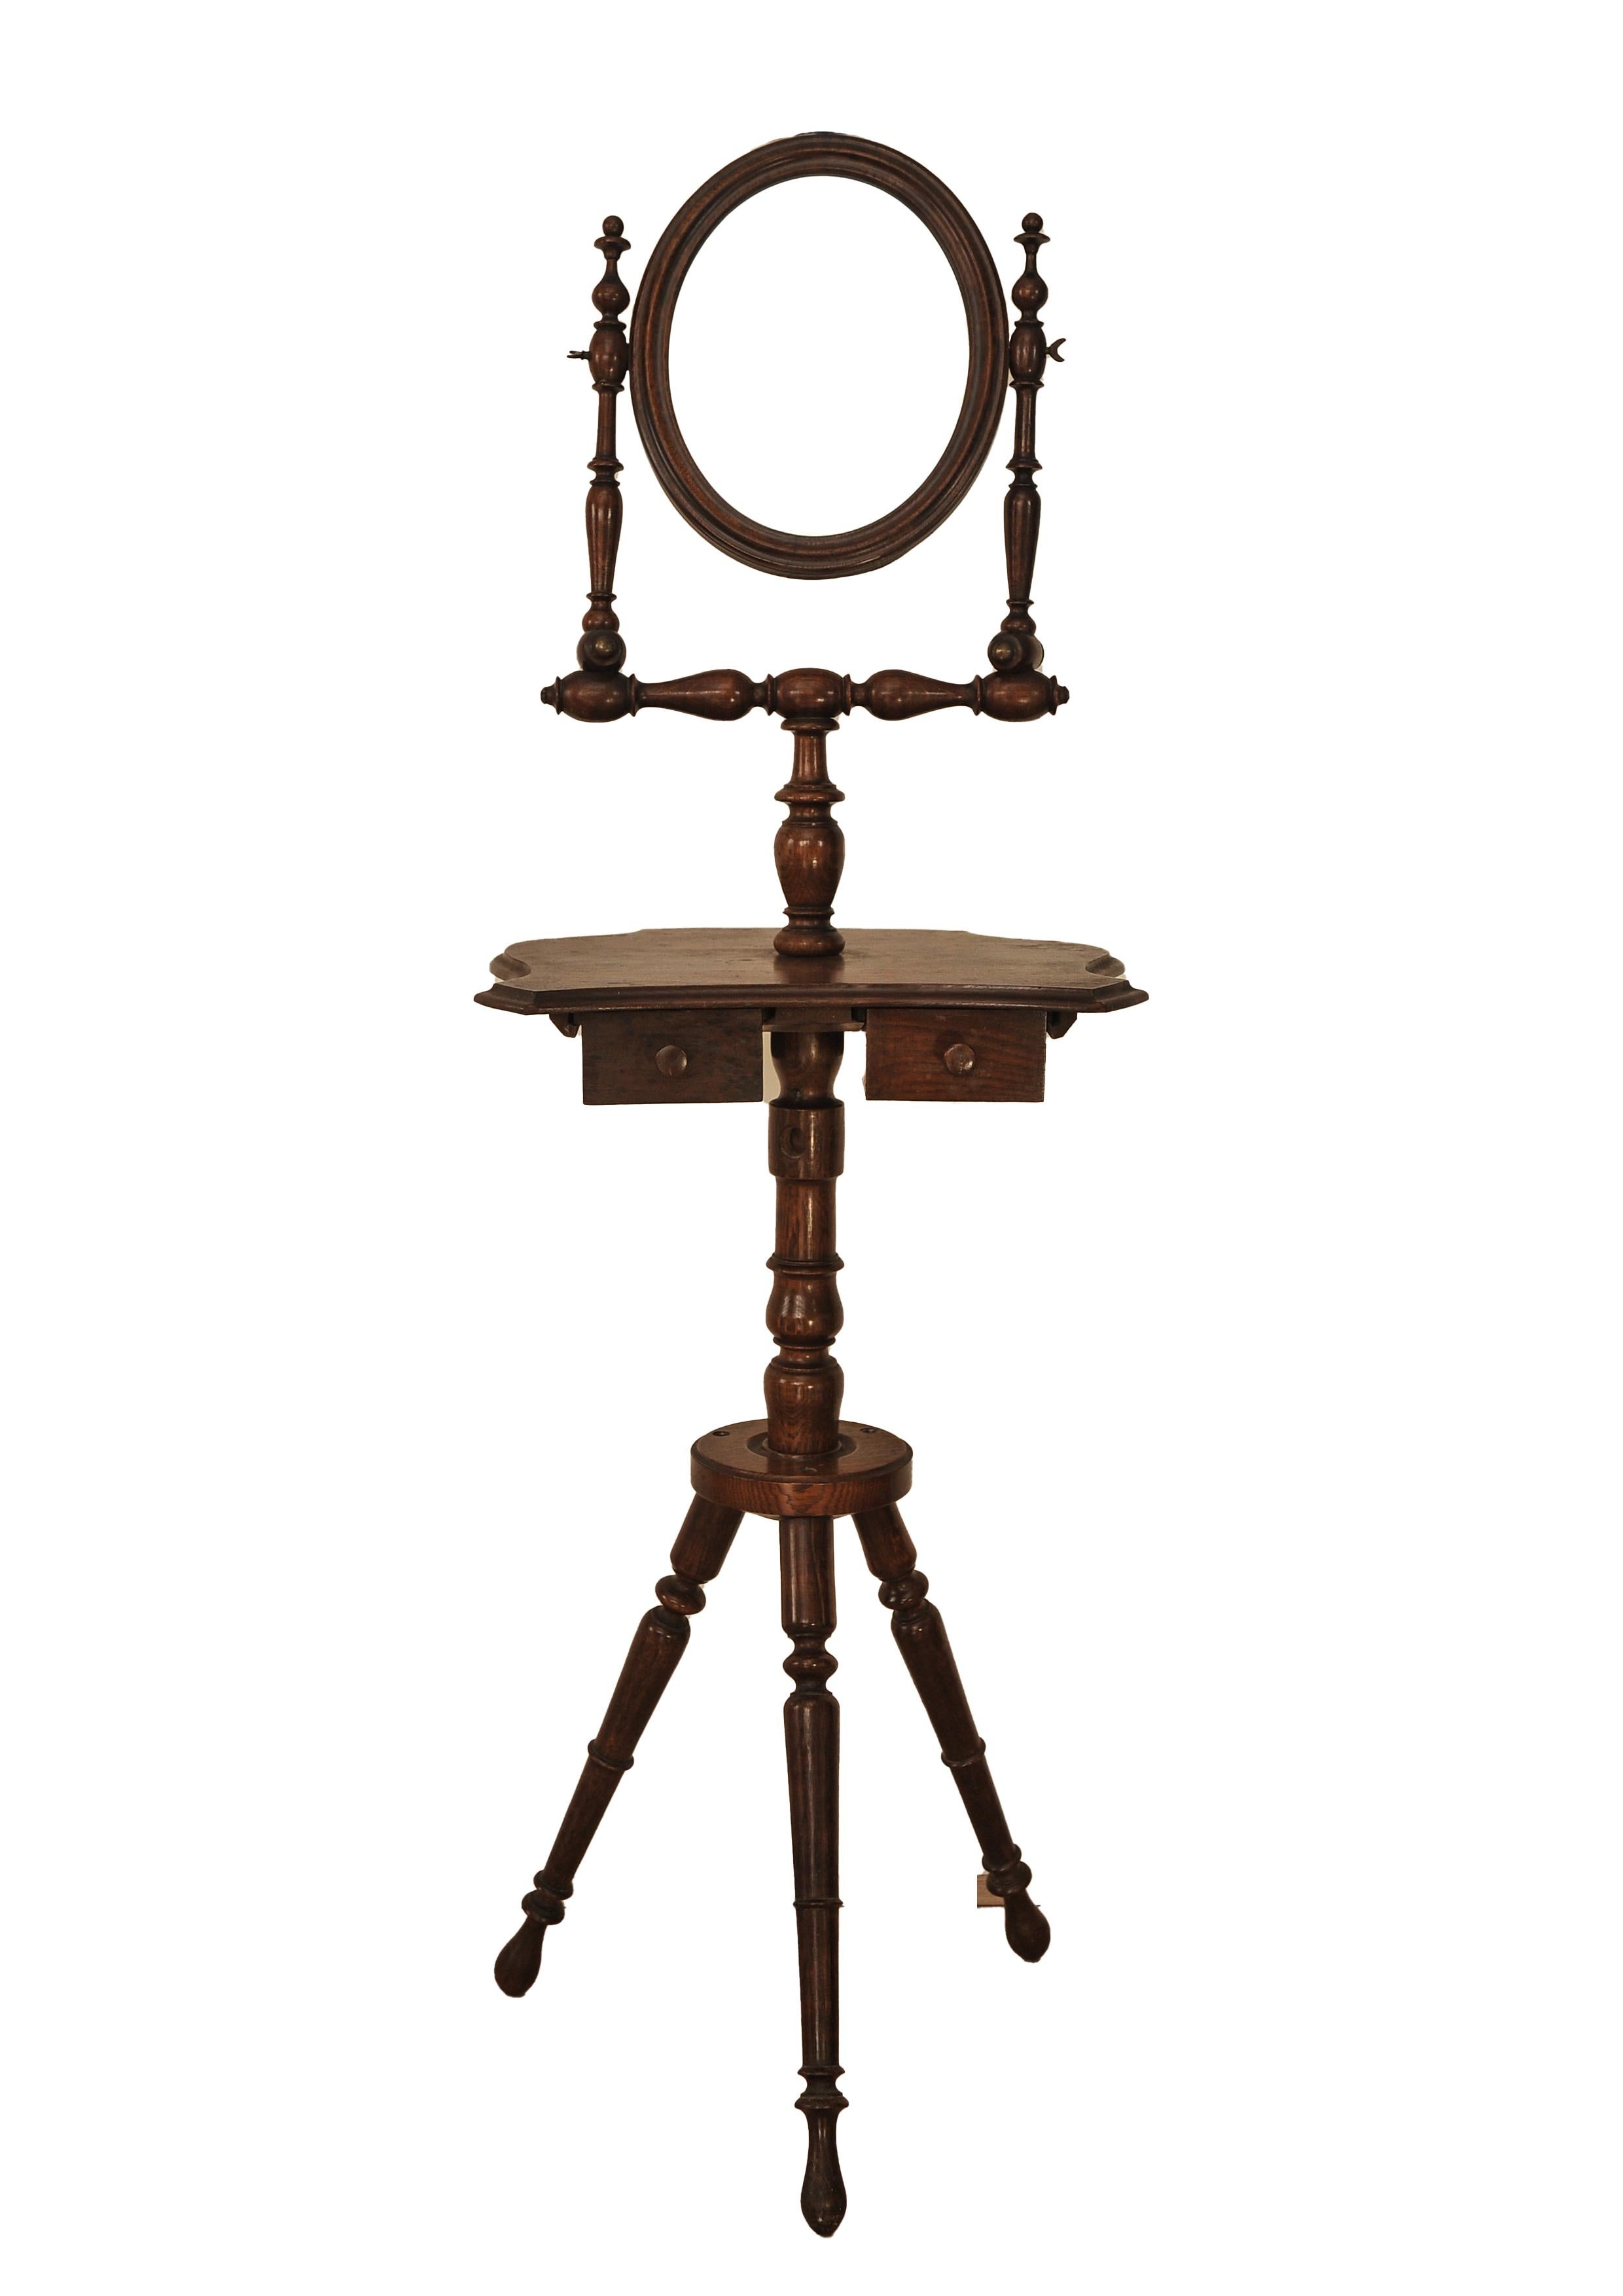 Brass Handmade Victorian Oak Shaving Stand With A Pivotable Oval Mirror on Turned Legs For Sale